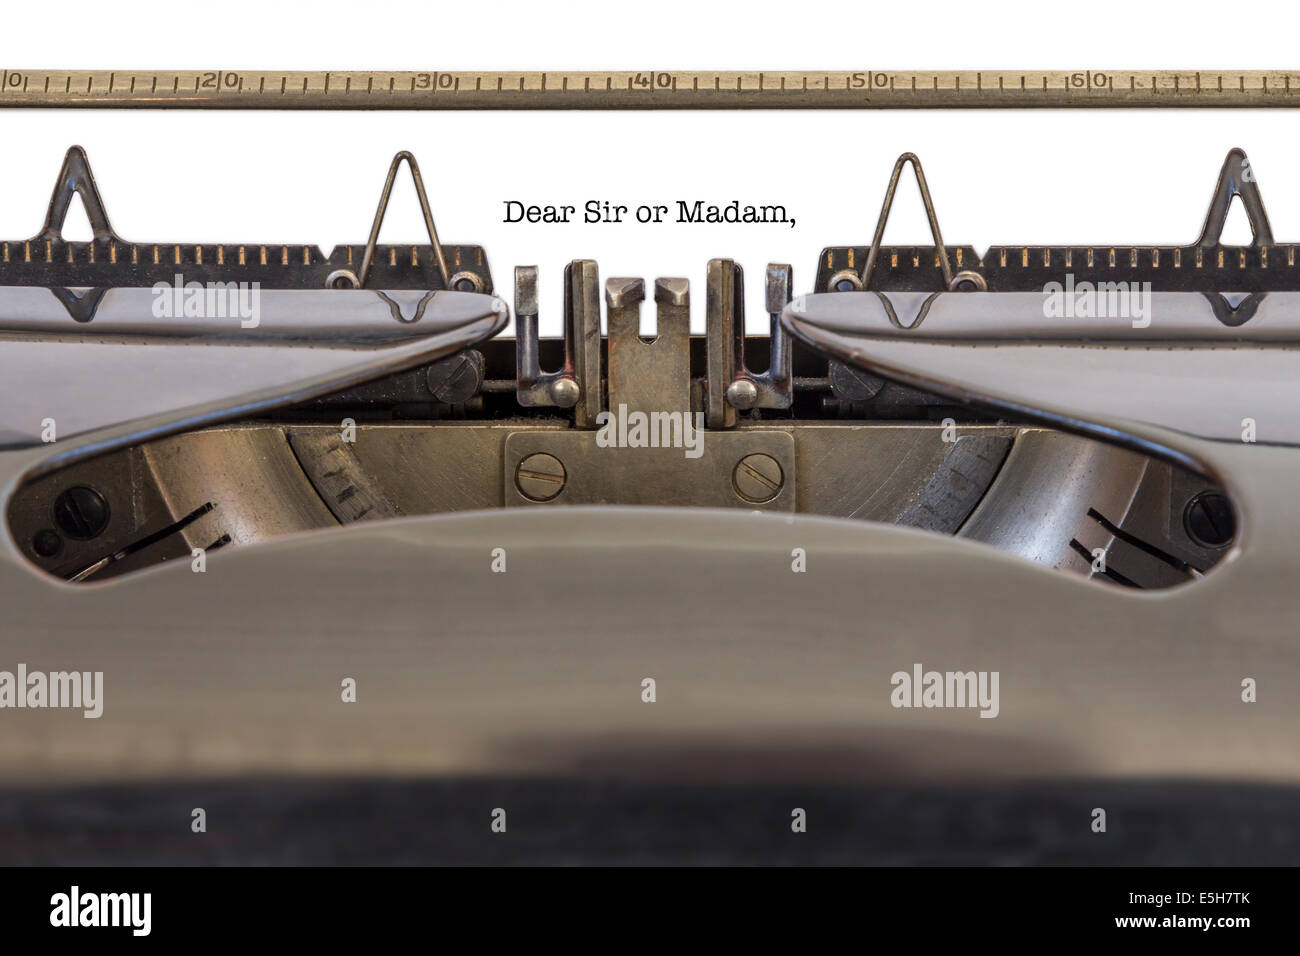 The Words 'Dear Sir or Madam' written on a typewriter Stock Photo